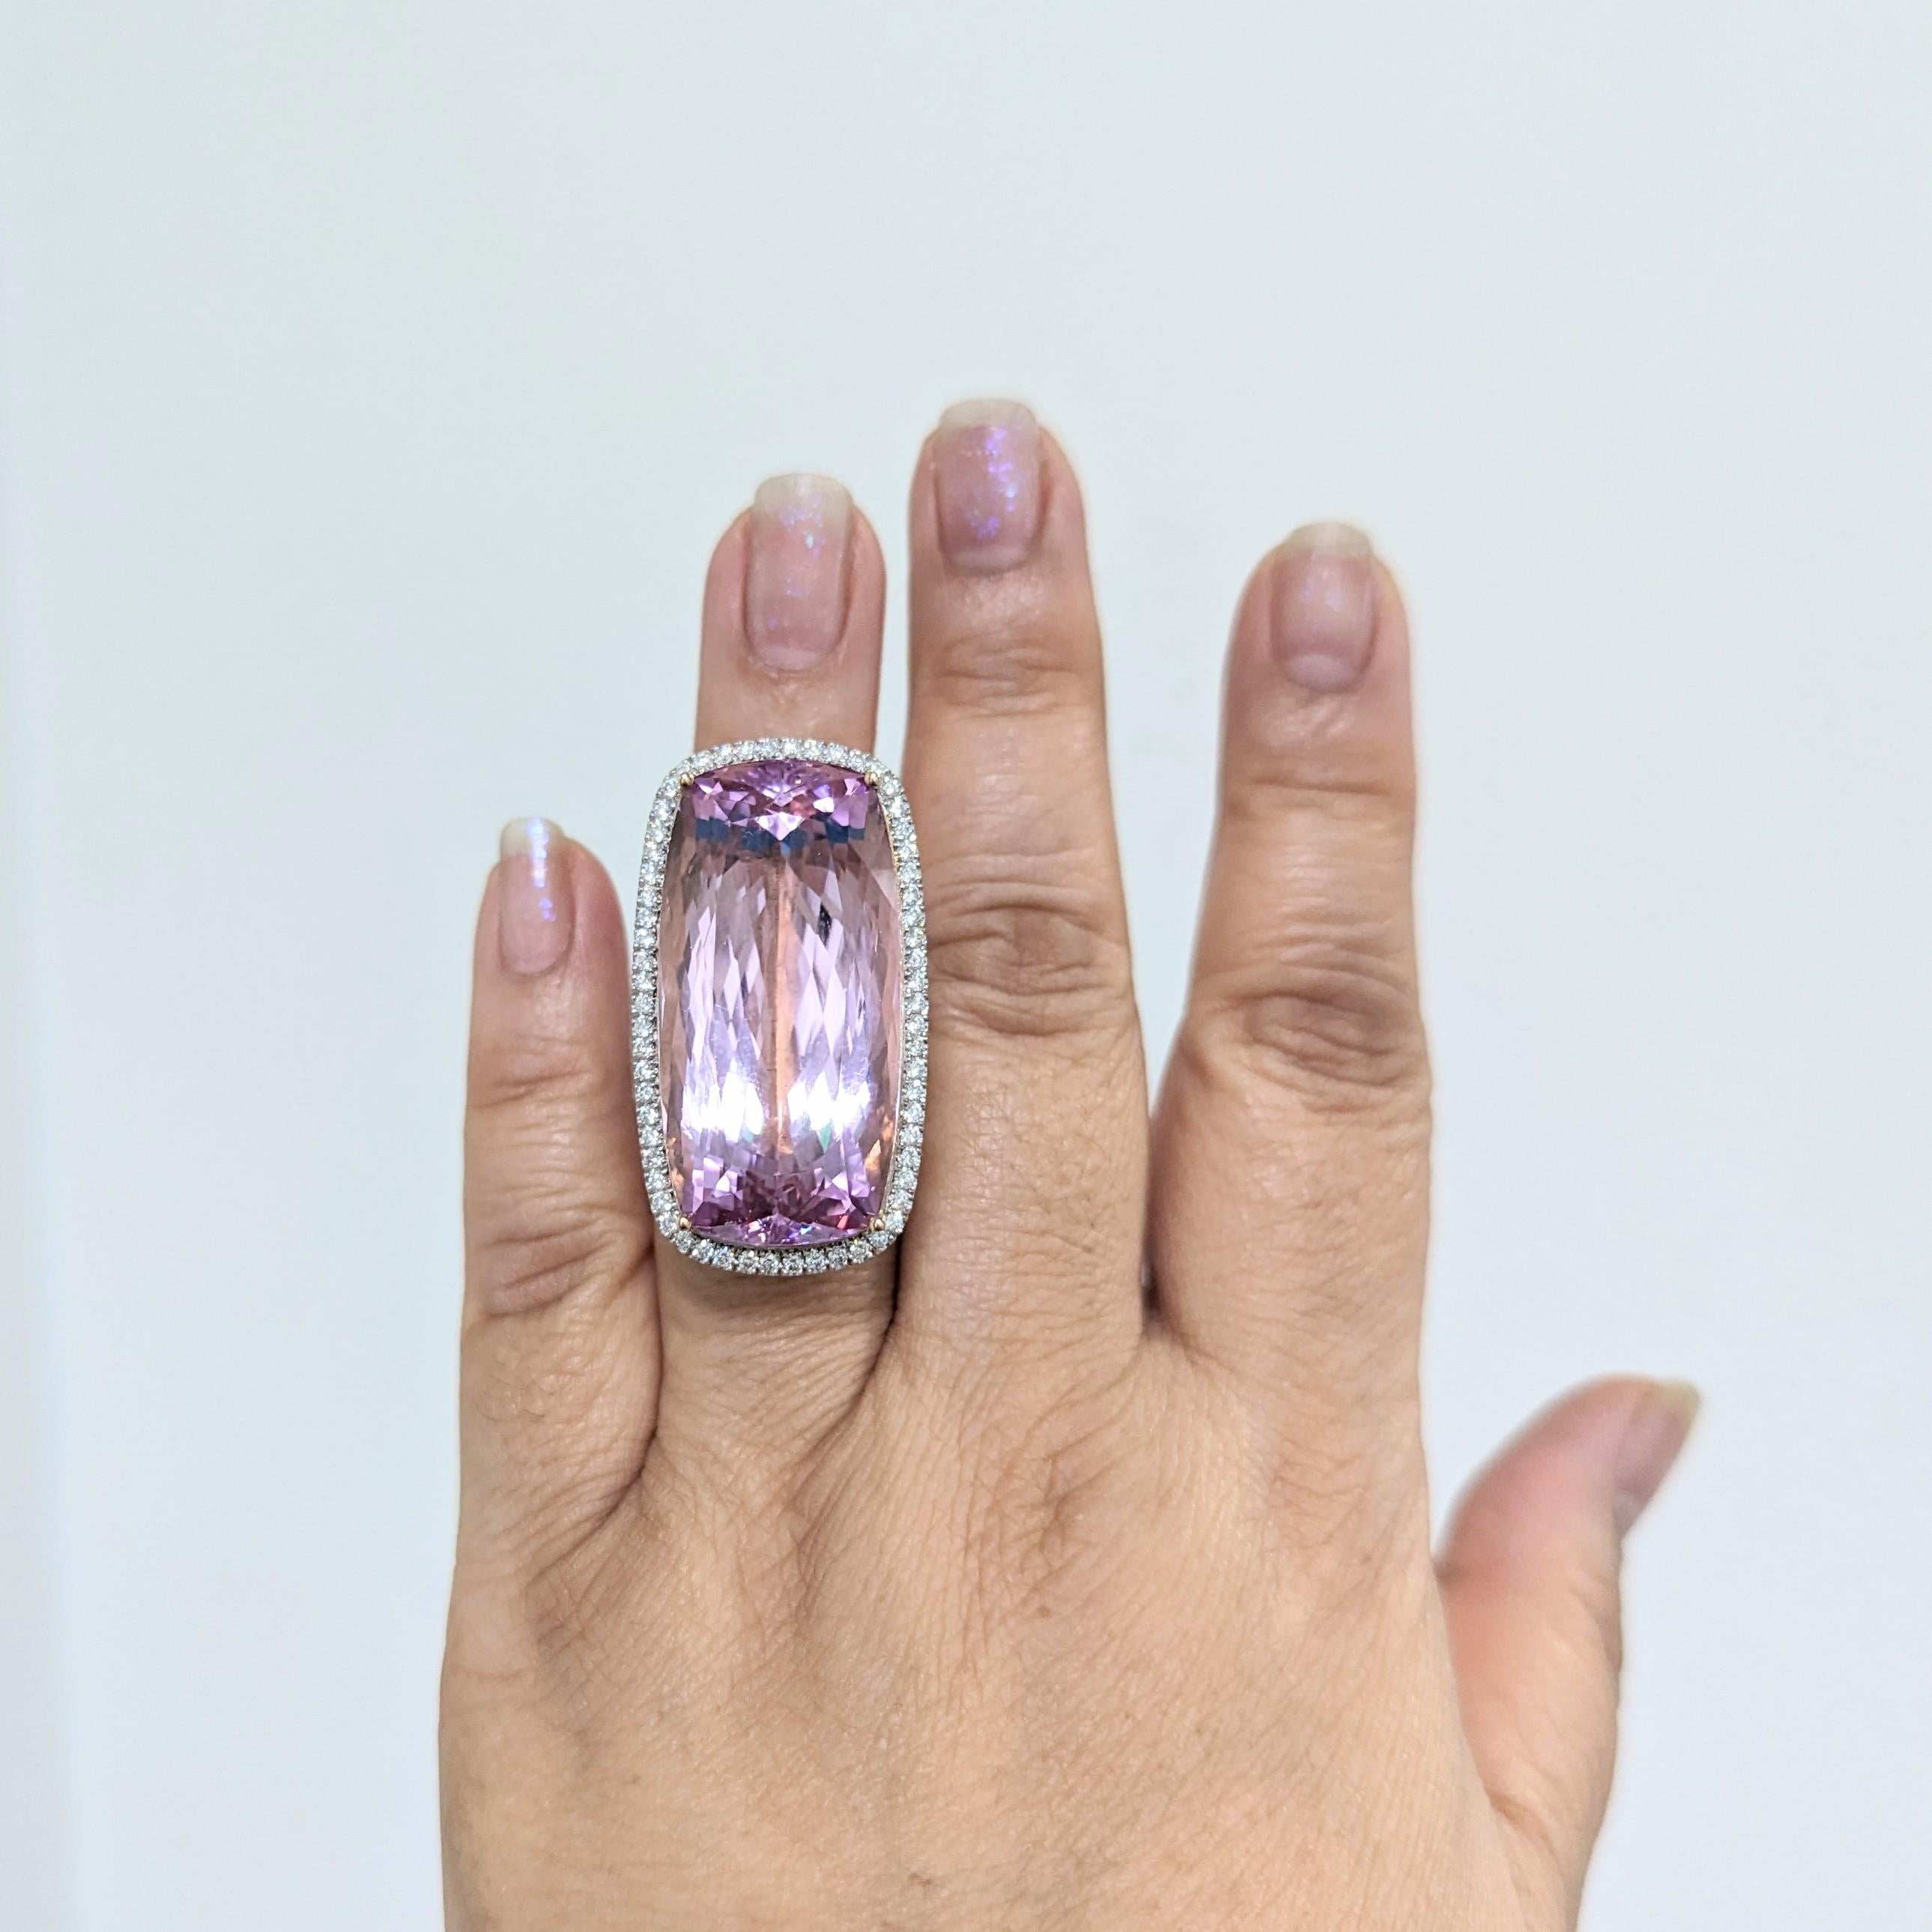 Gorgeous 83.24 ct. kunzite rectangular cushion with 1.45 ct. good quality white diamond rounds.  Handmade in 18k white and yellow gold.  Ring size 6.5.